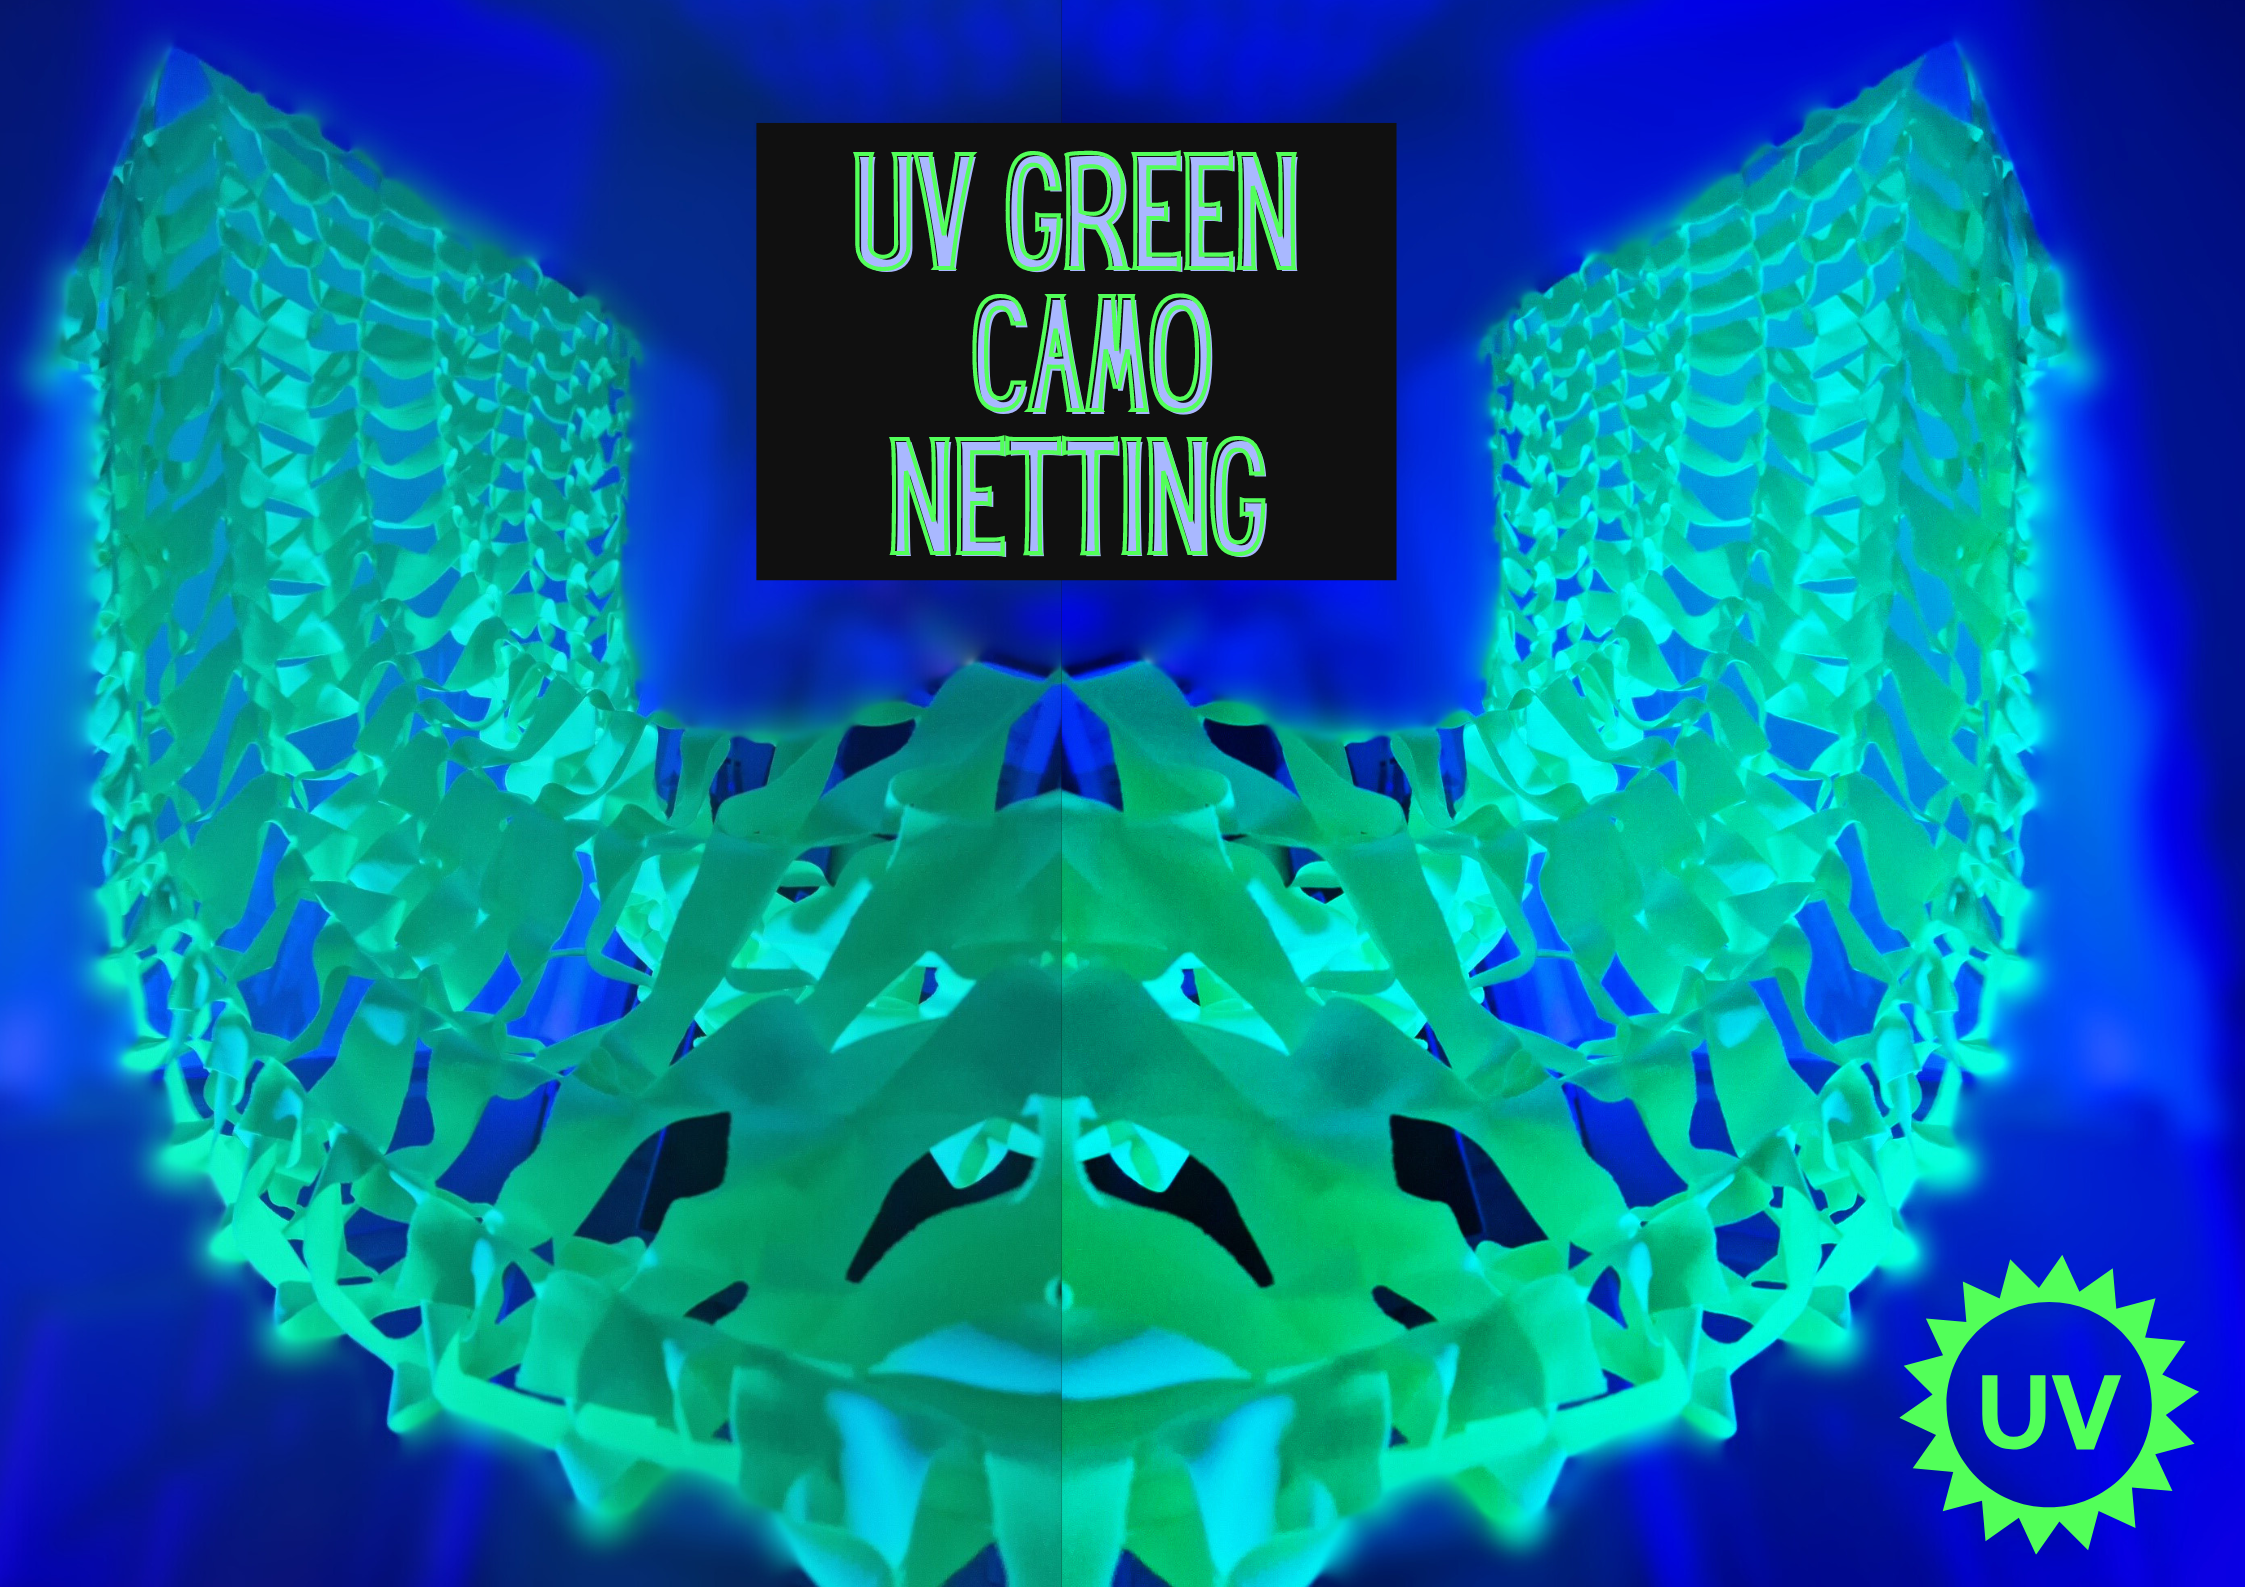 uv green camo netting event party glow in the dark ceiling decoration